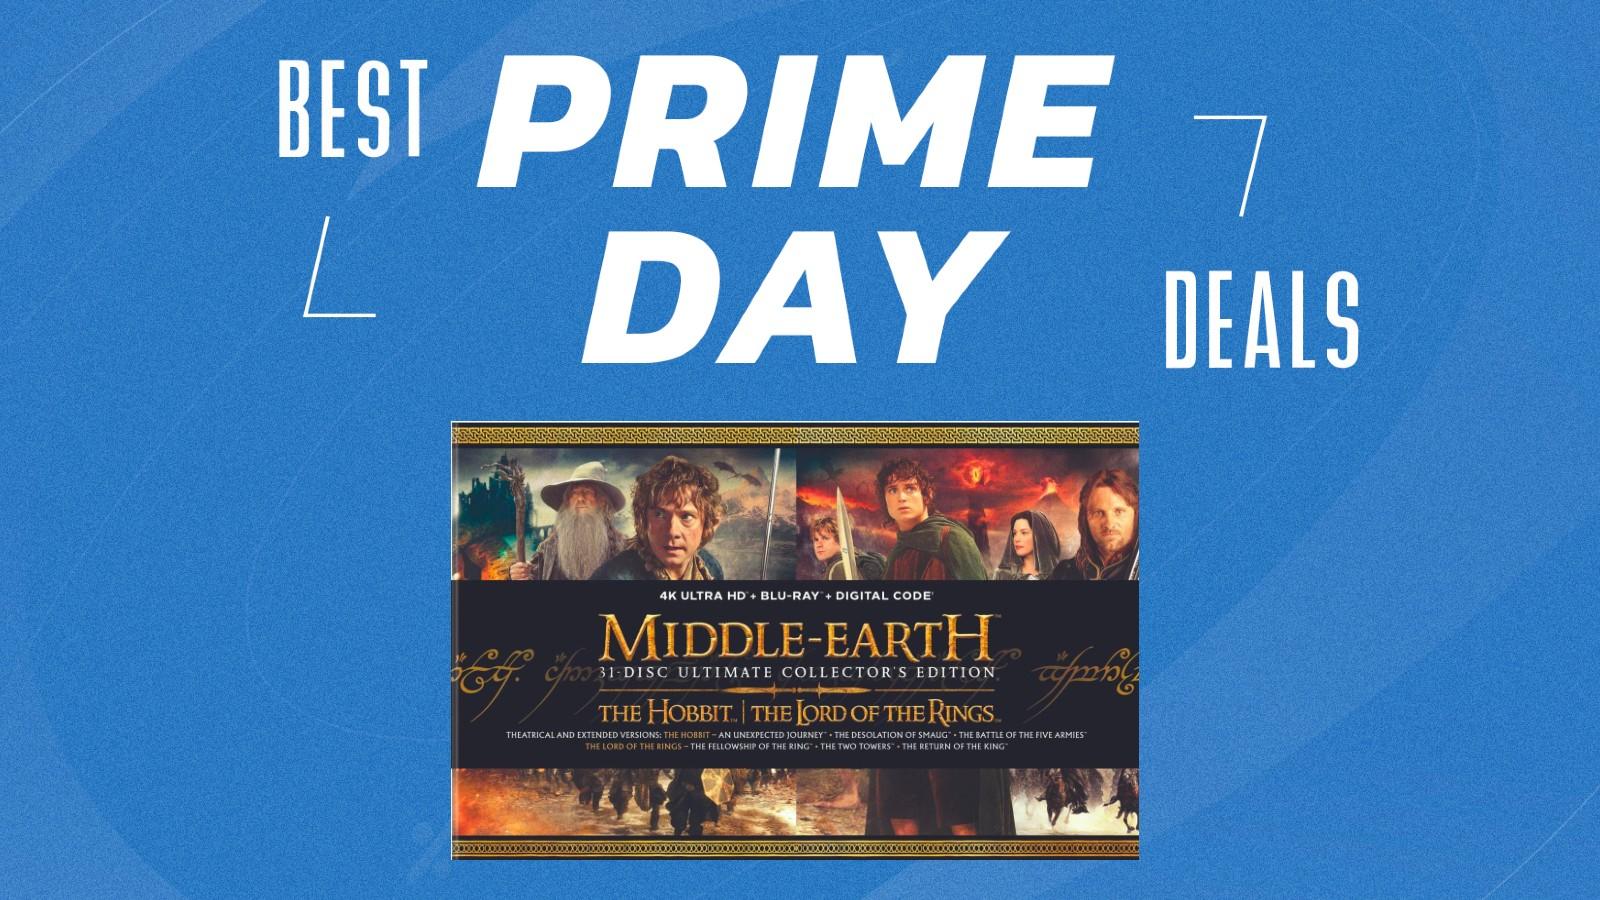 The Middle Earth 6-Film Ultimate Collection on 4K Ultra HD and Blu-ray on the Prime Day movie deals